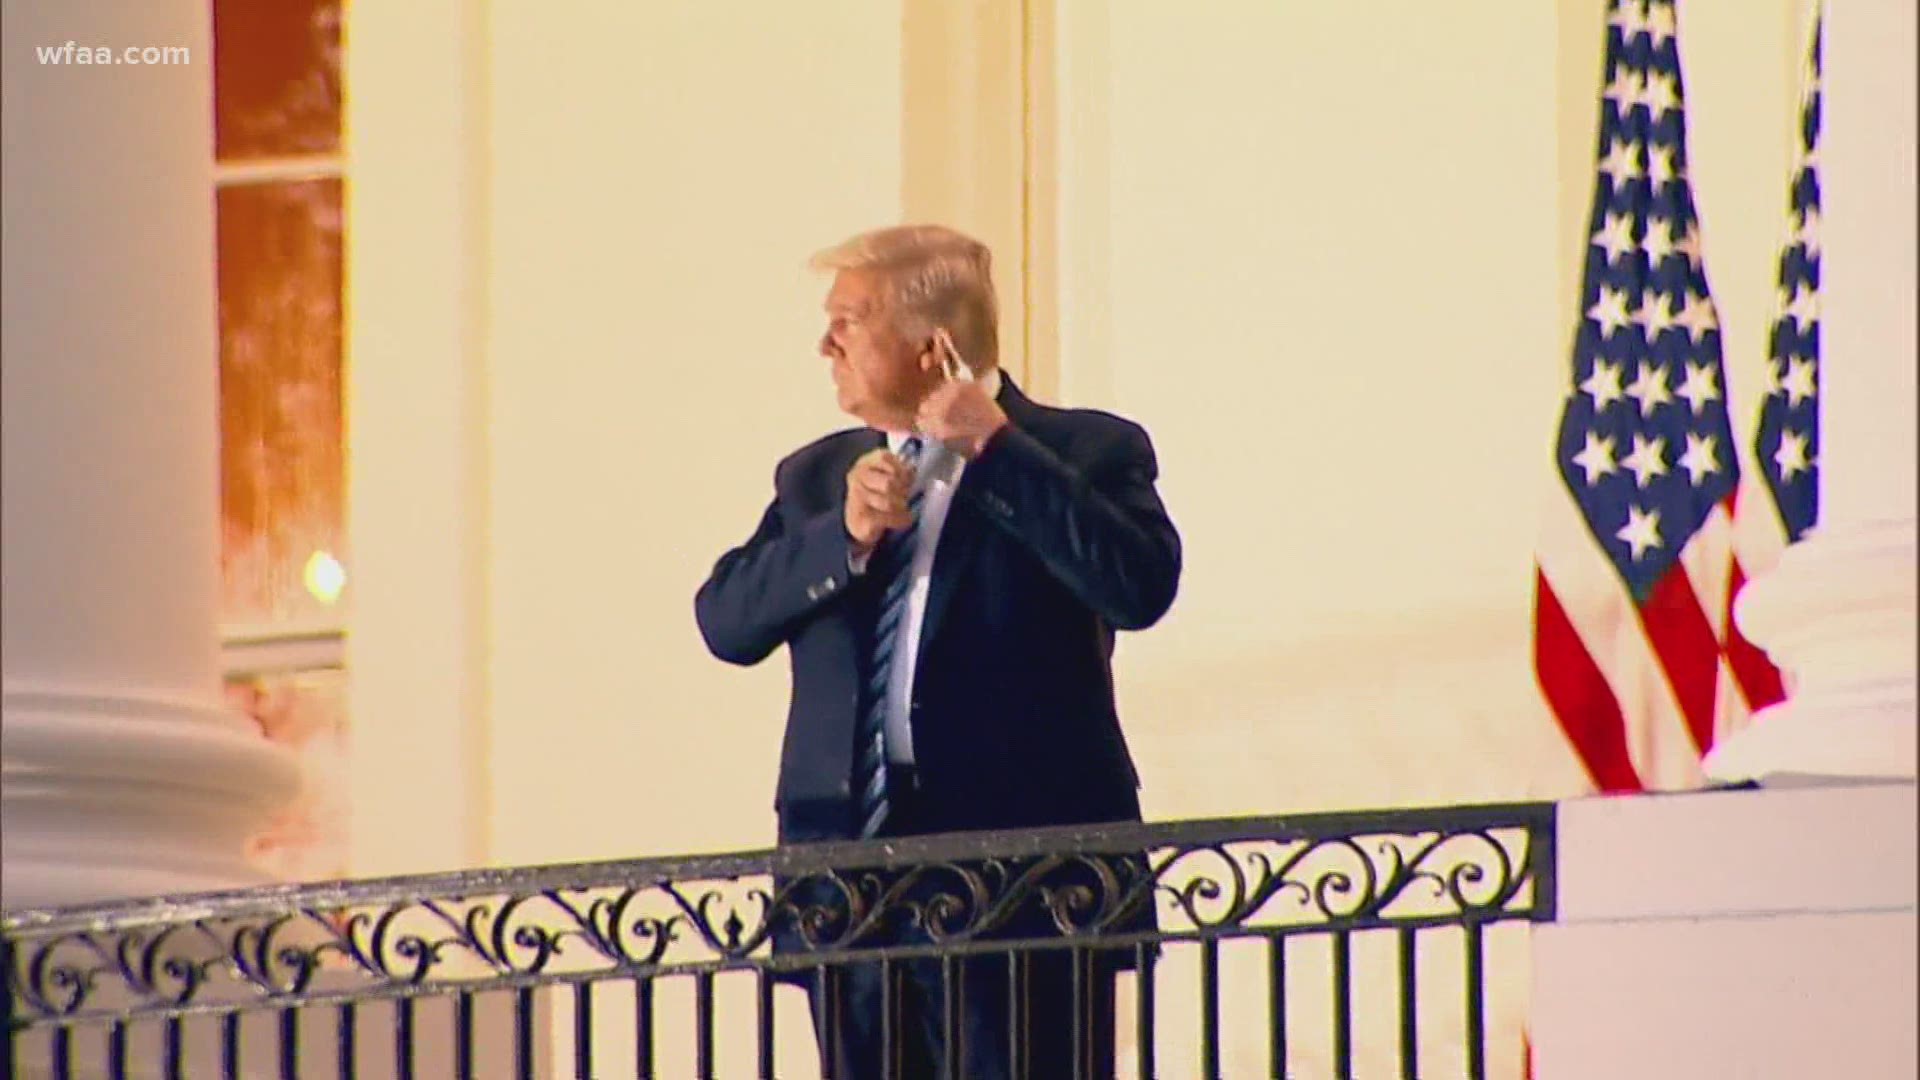 The president released a video from the White House saying he's "better."